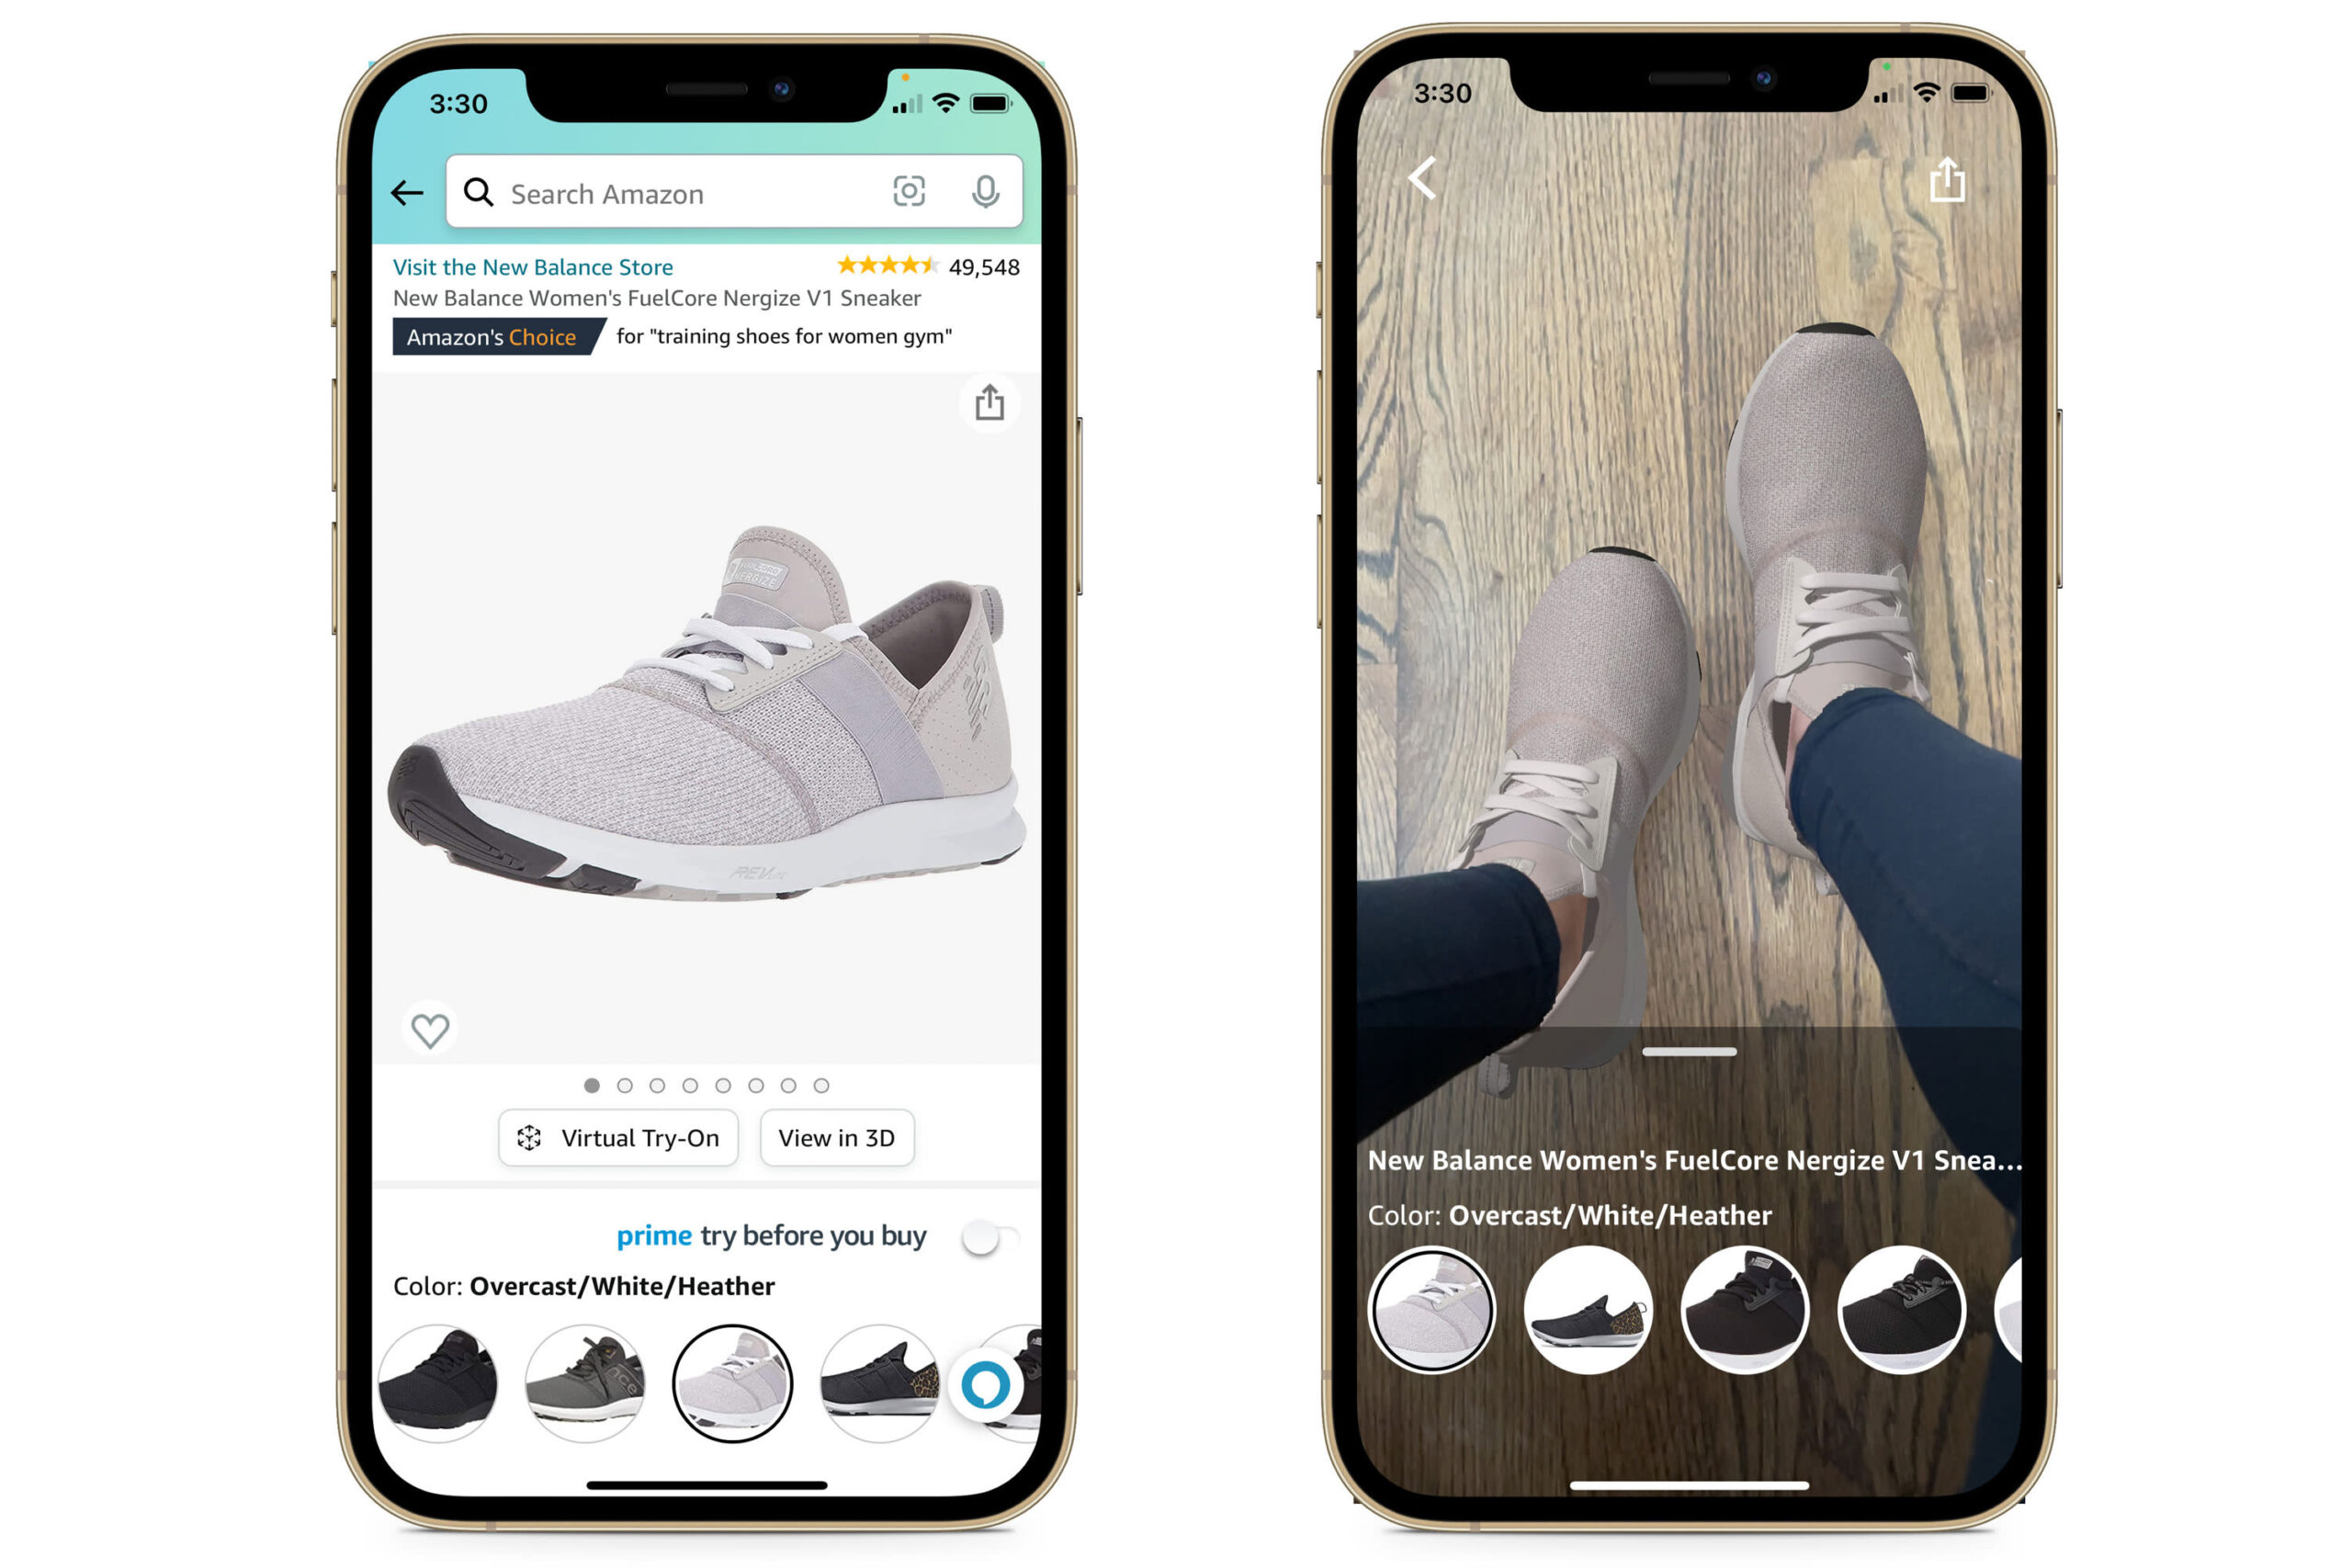 You Can Now Virtually Try on Shoes With Amazon’s New AR Feature